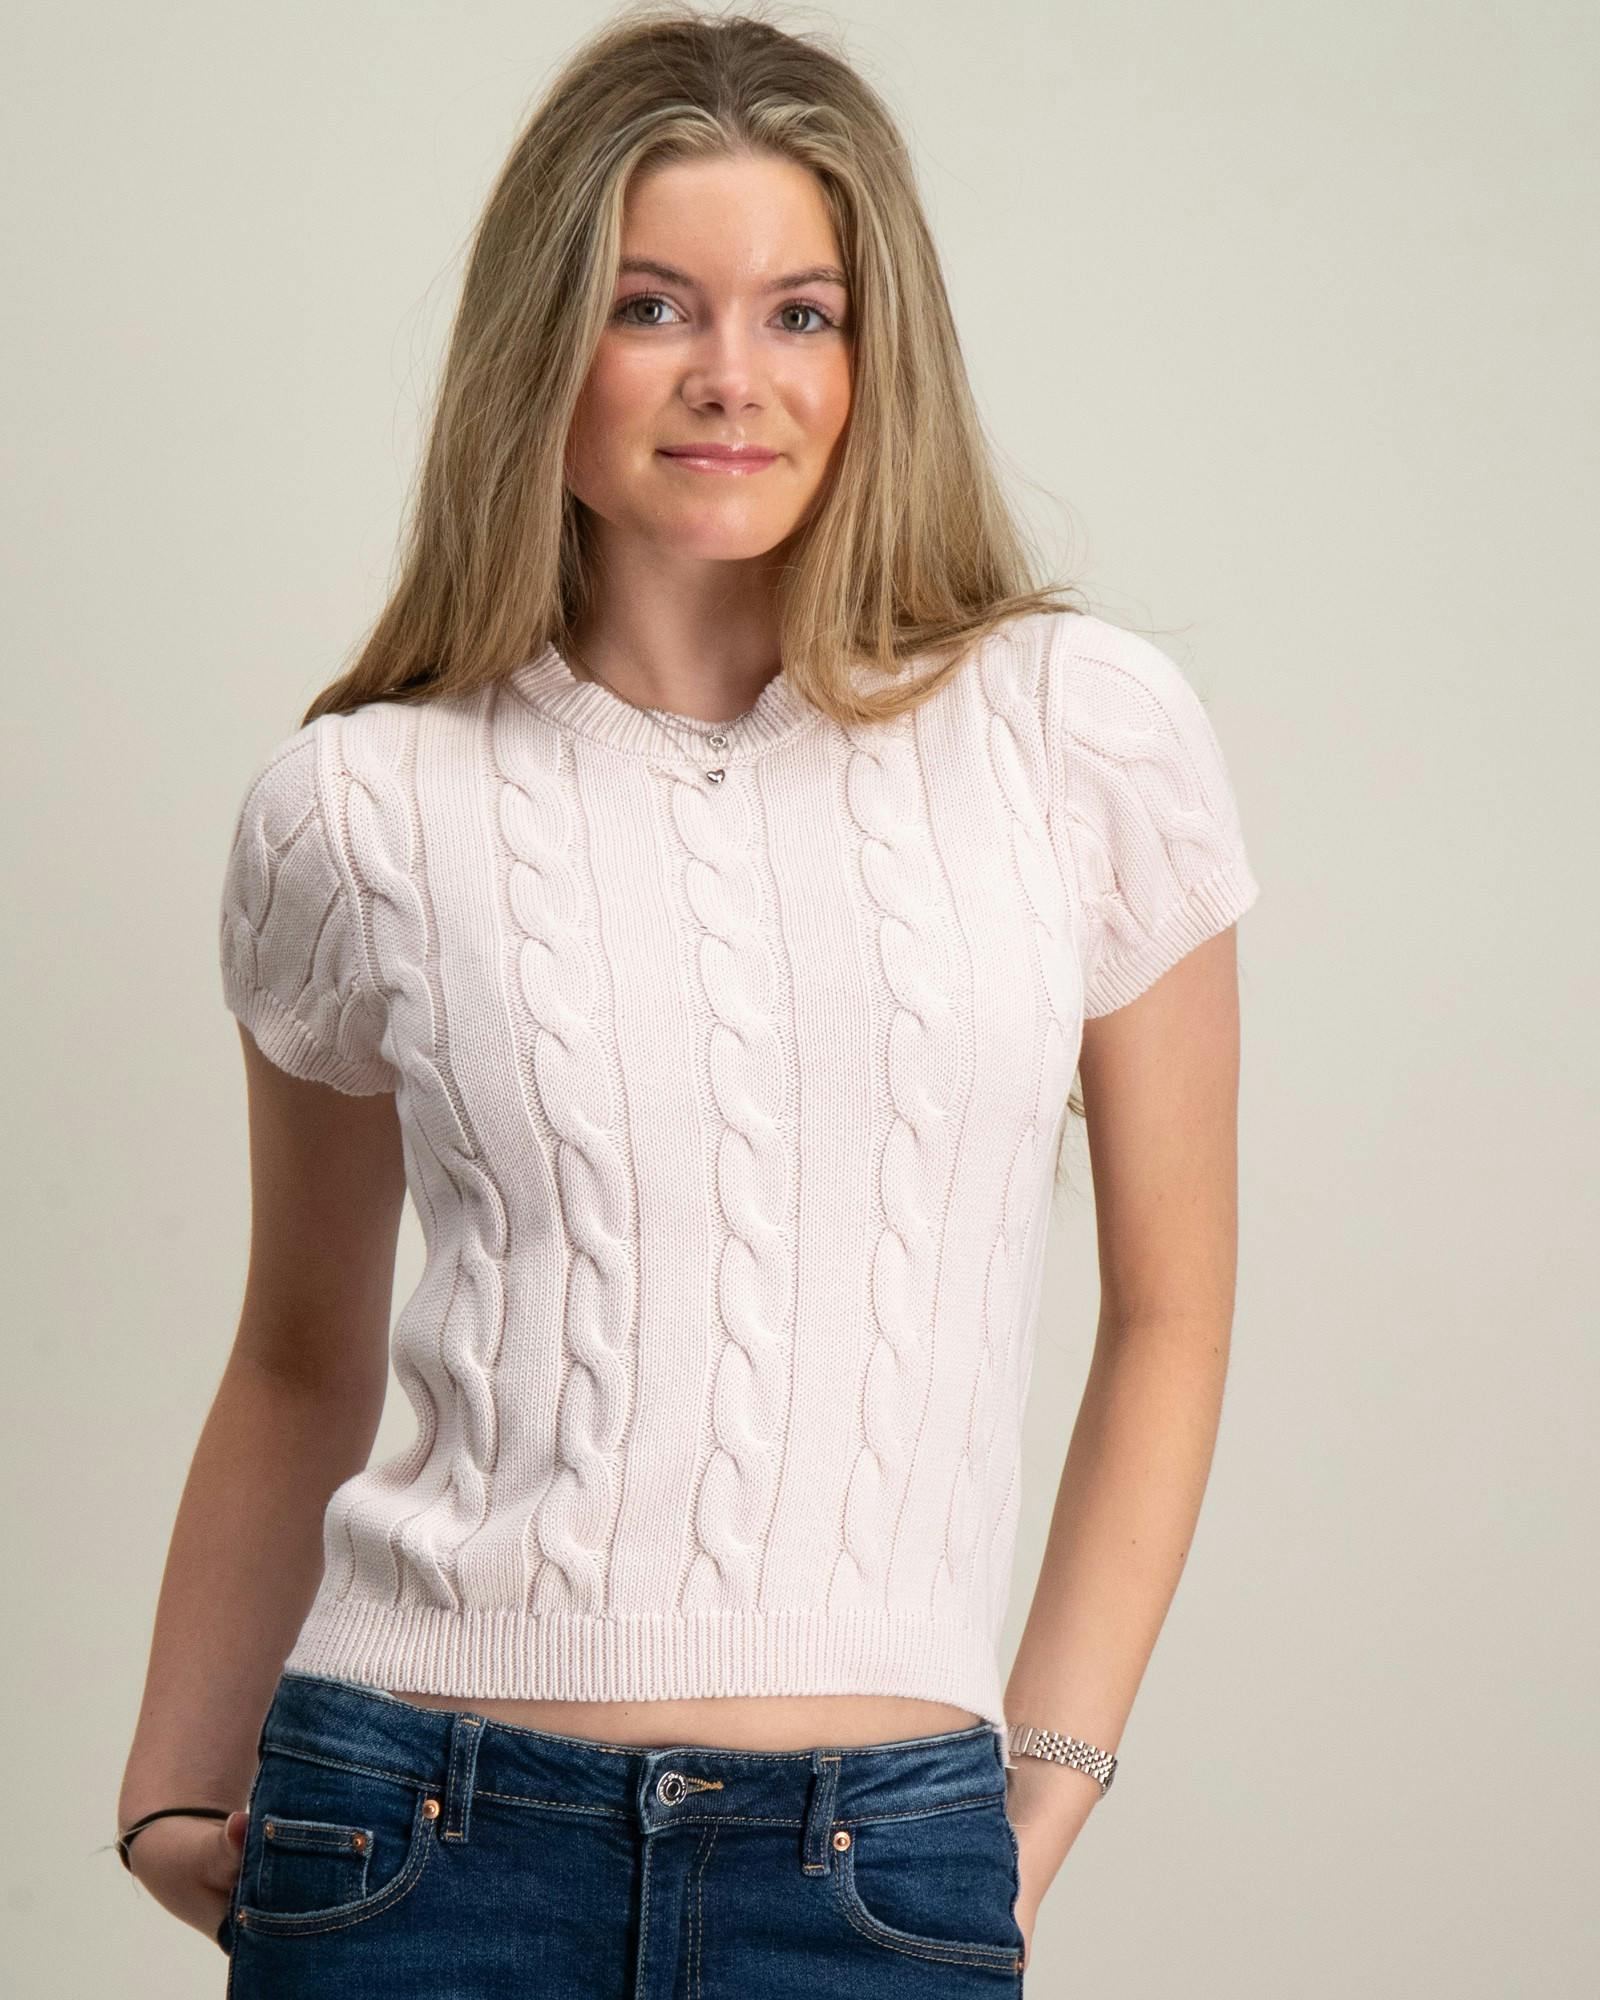 Y cable knitted top